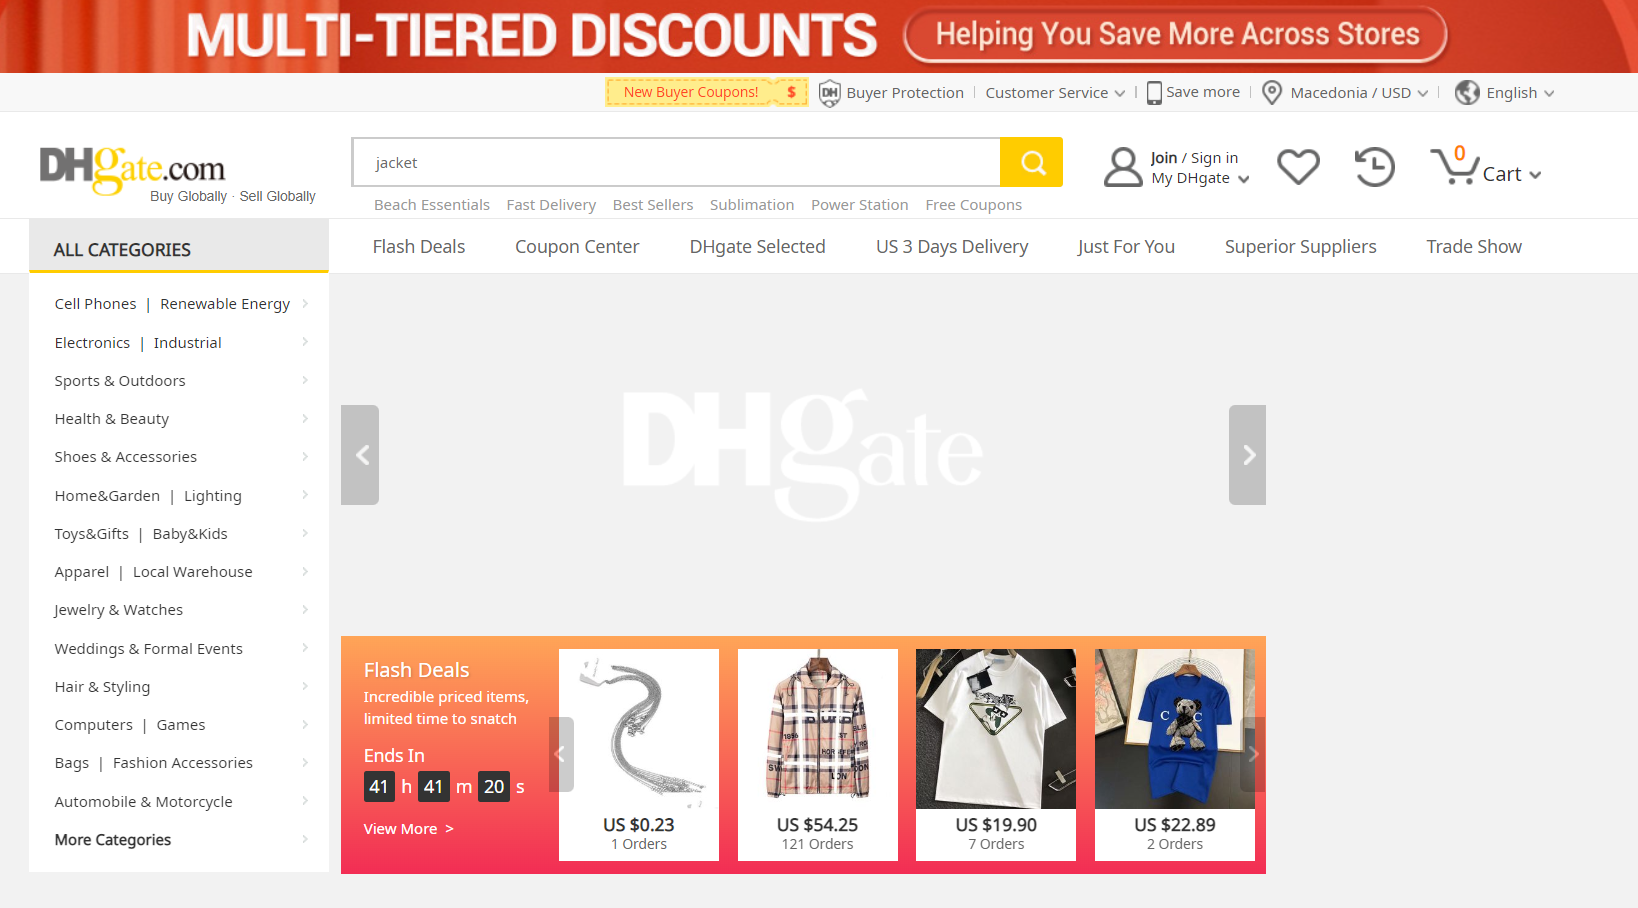 How to Make Money with DHgate